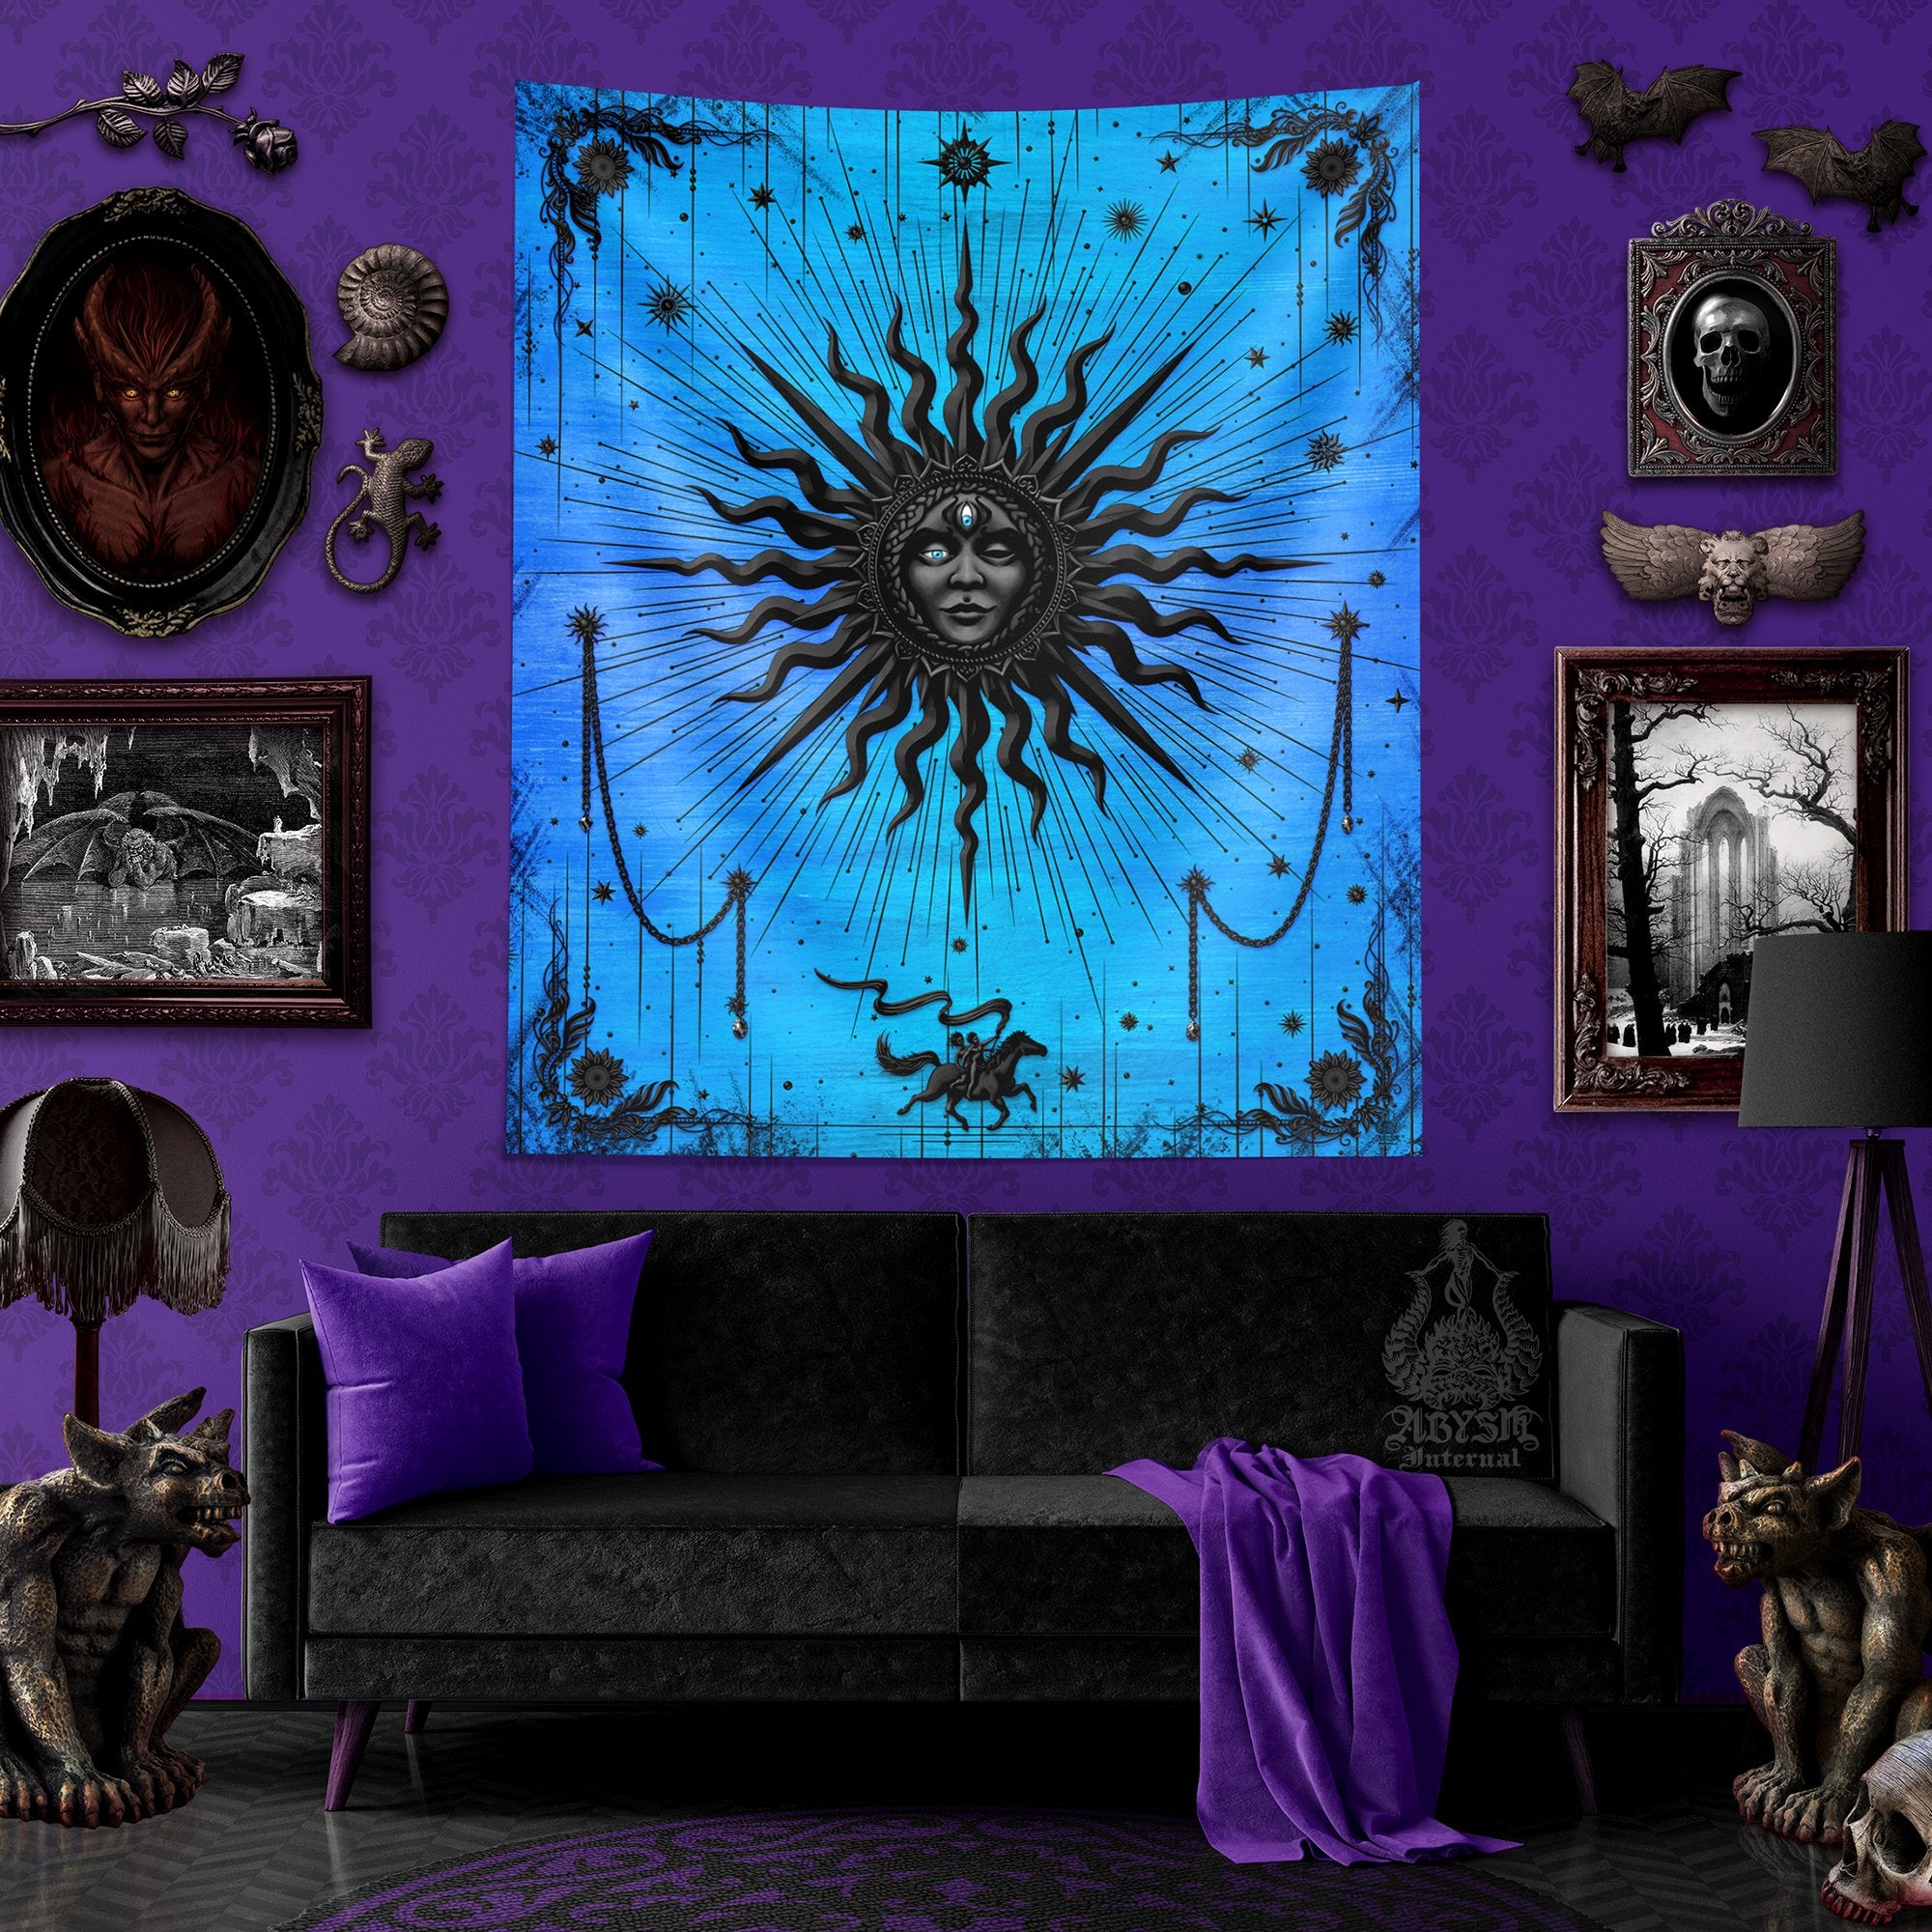 Witchy Sun Tapestry, Tarot Card Arcana Wall Hanging, Magic and Esoteric Art, Fortune Teller and Witch's Room Decor, Vertical Print - Cyan Blue - Abysm Internal